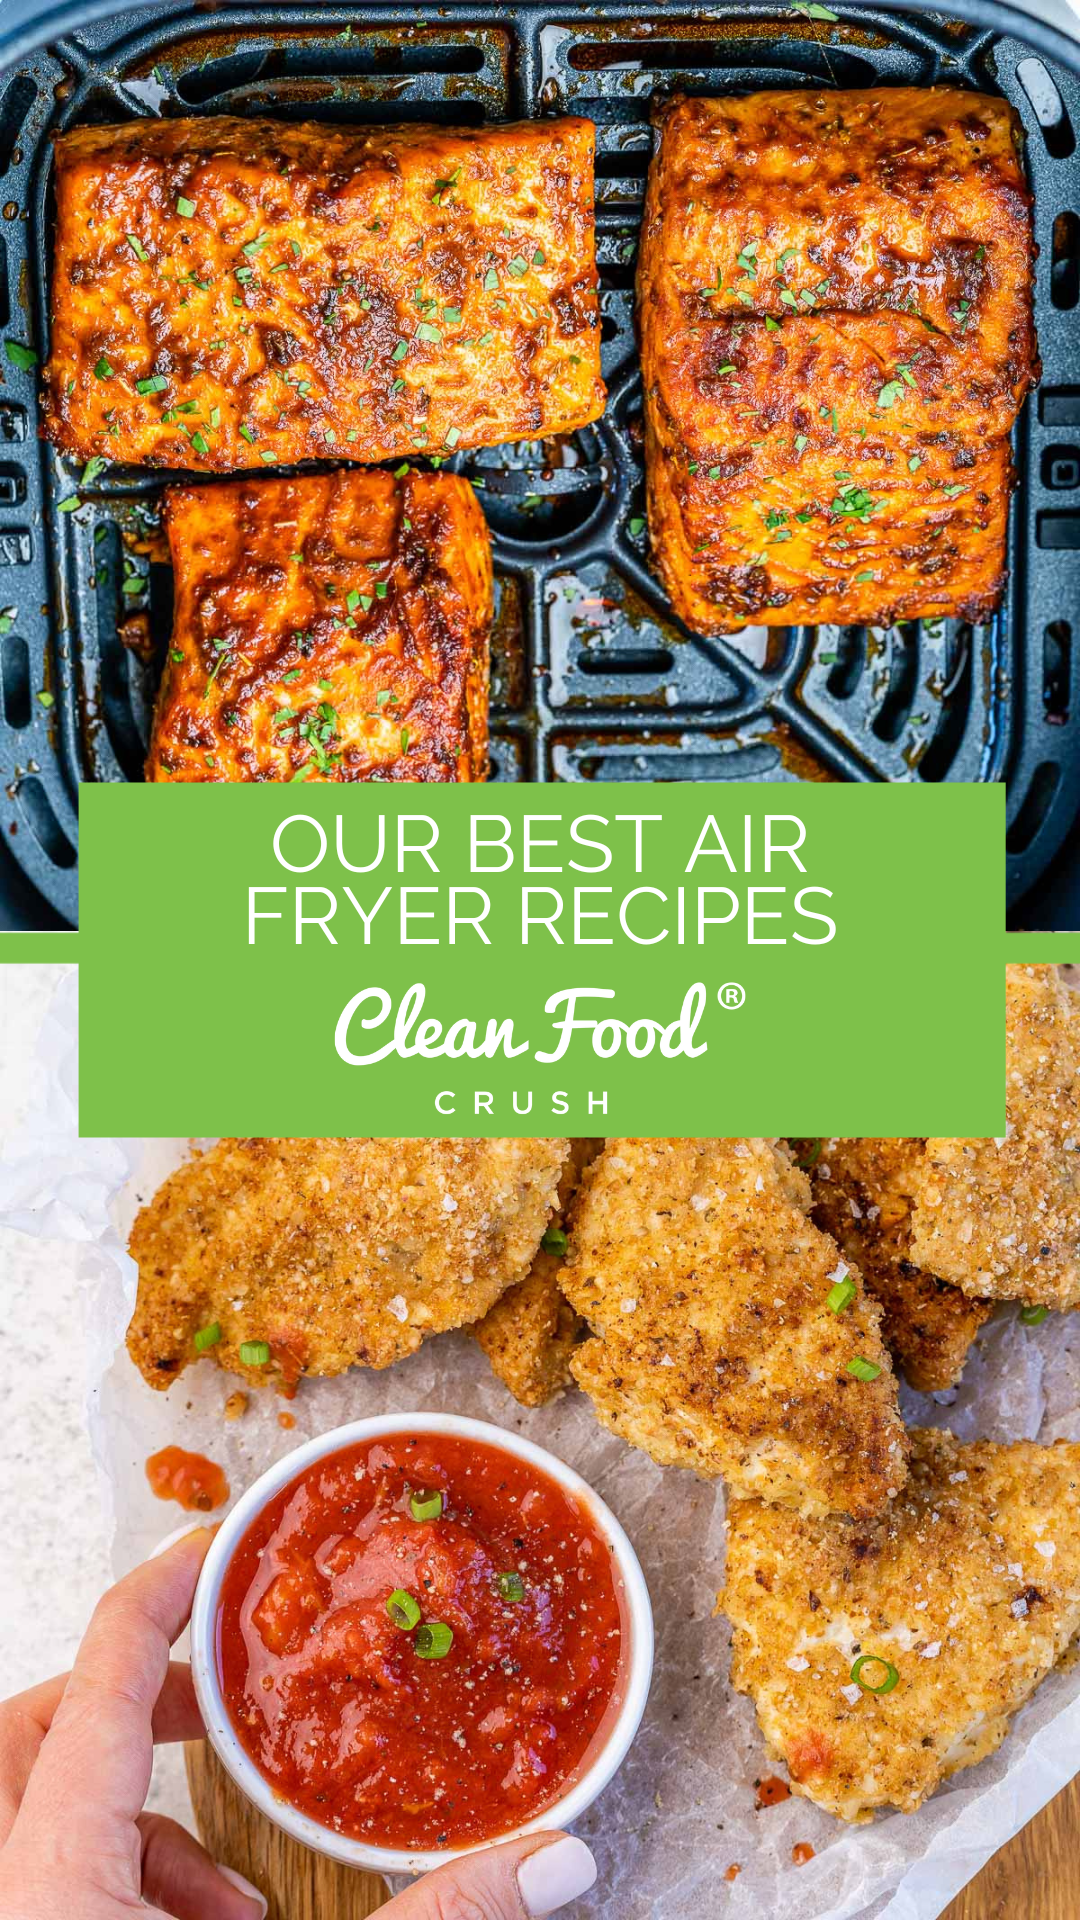 https://cleanfoodcrush.com/wp-content/uploads/2023/06/CFC-Our-BEST-Air-Fryer-Recipes.png